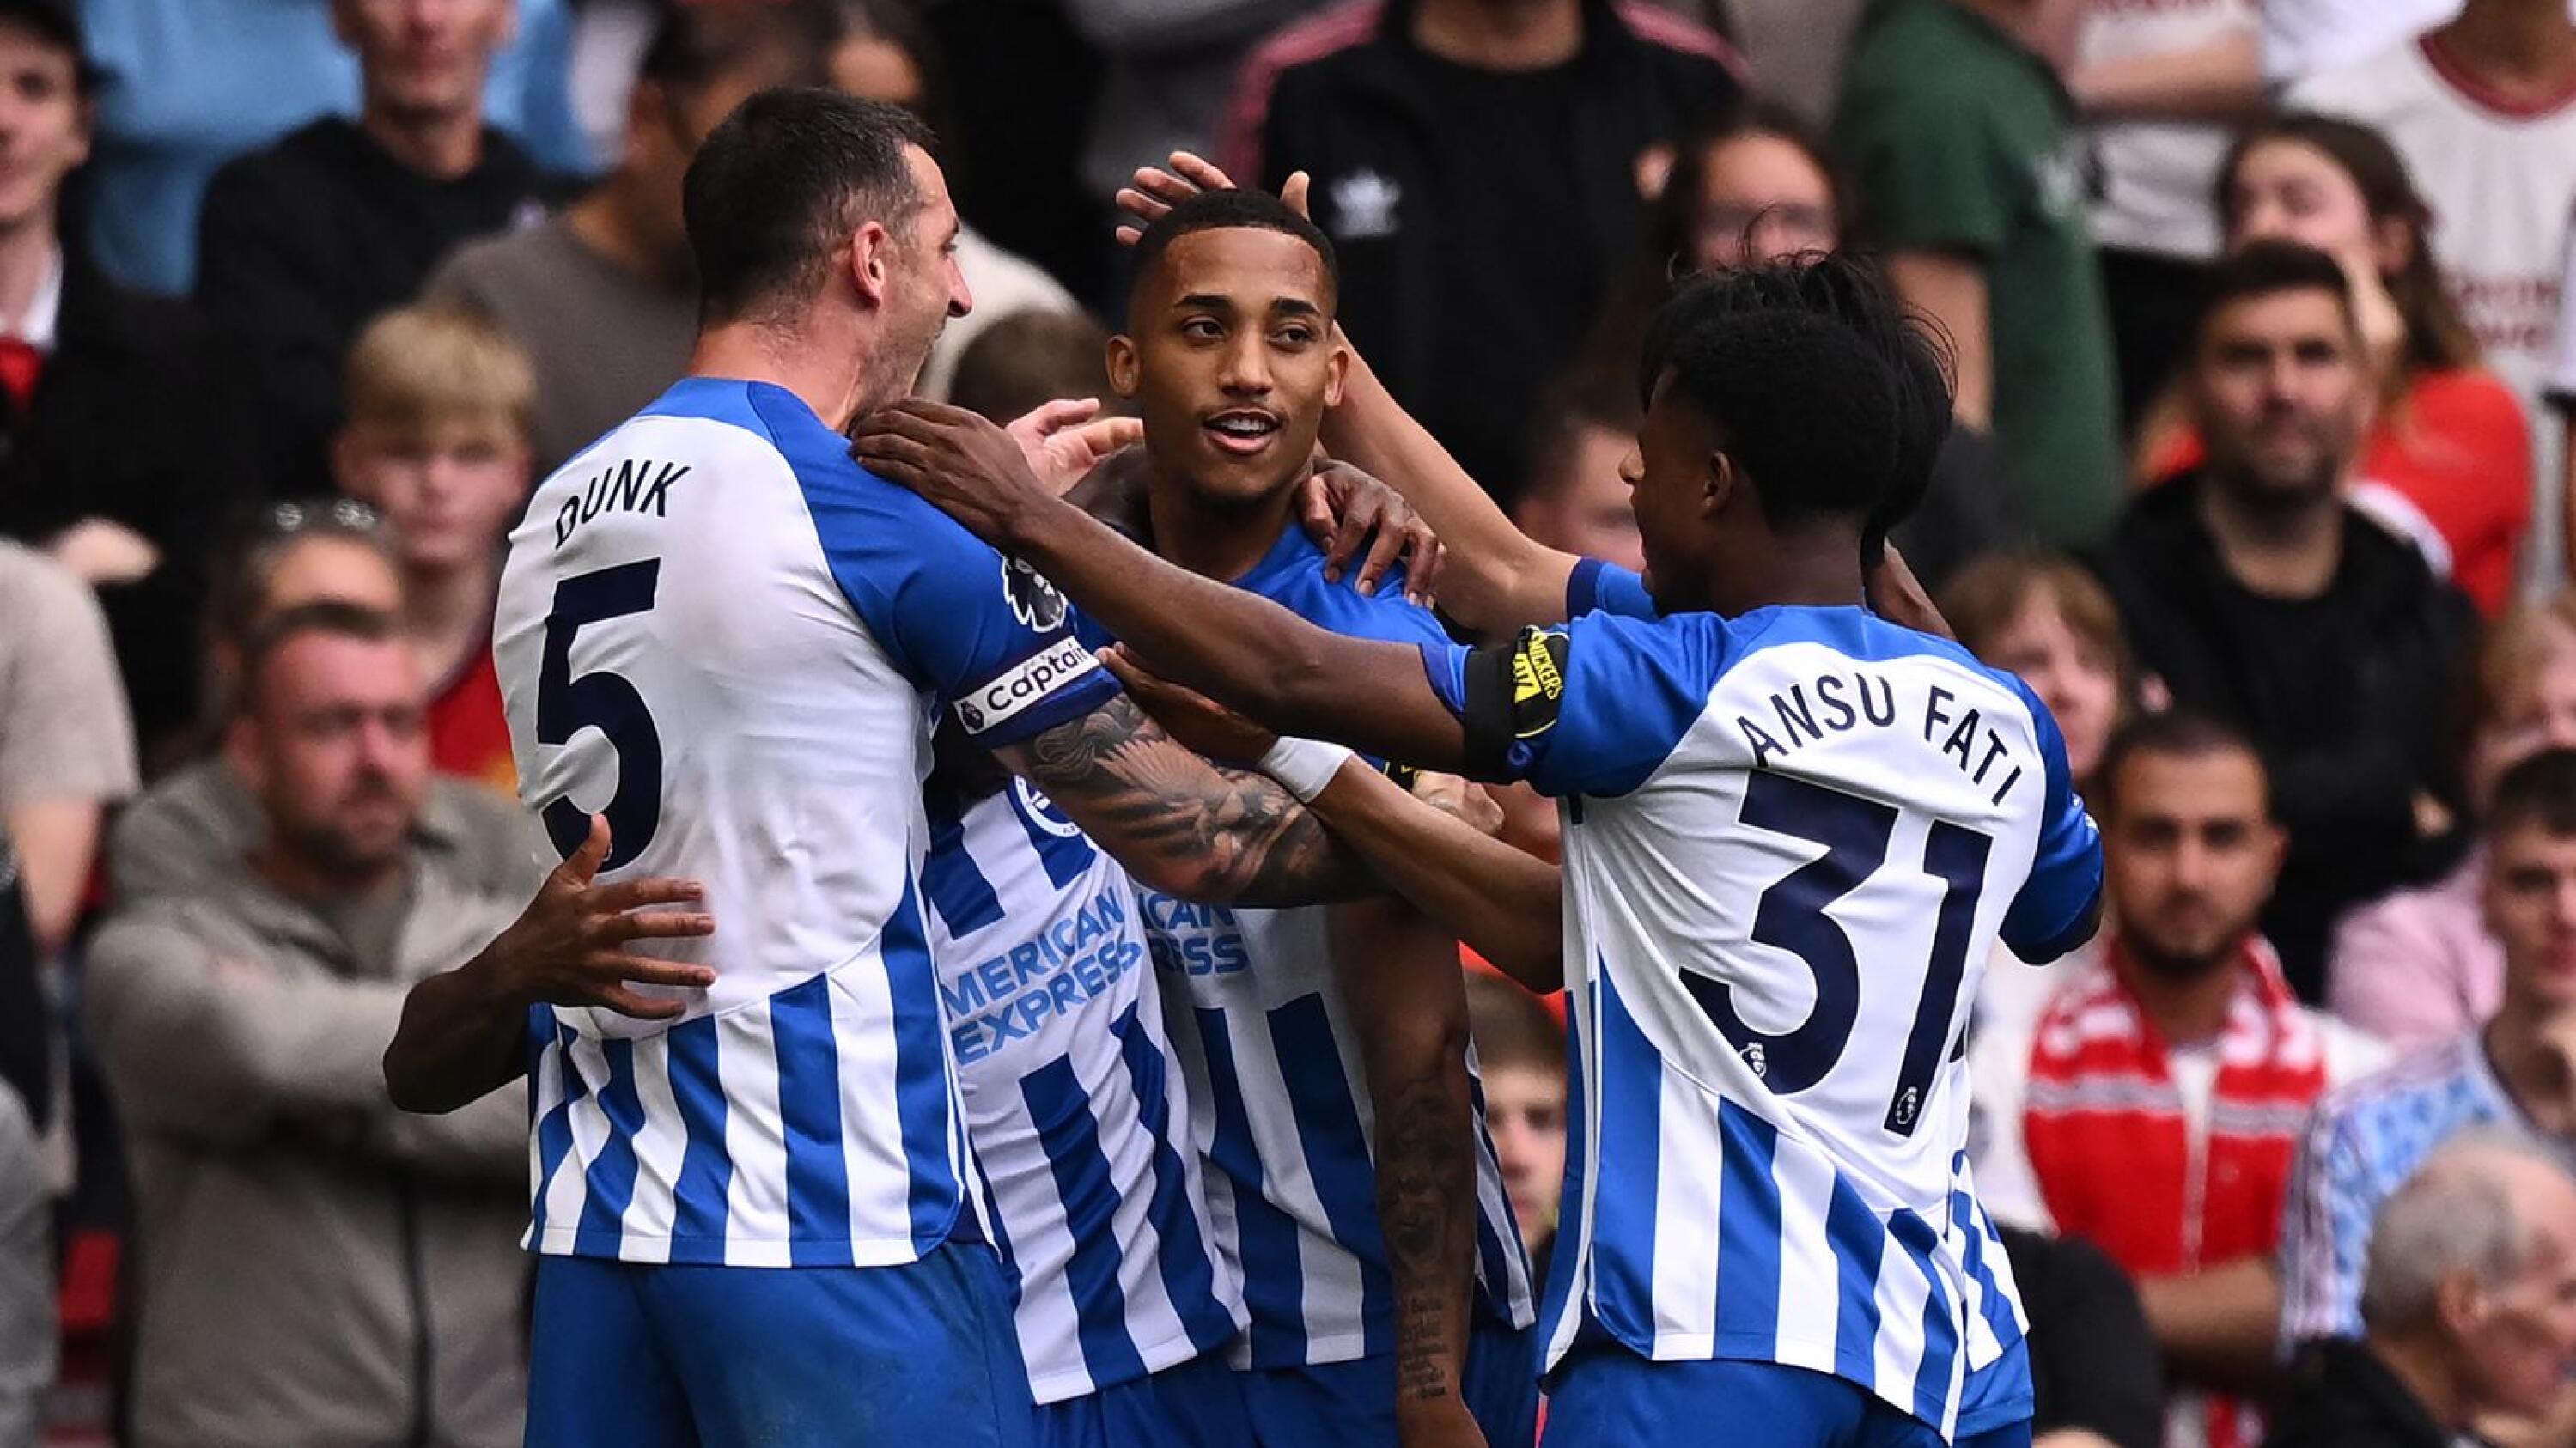 Brighton's Joao Pedro celebrates with teammates after scoring their third goal during their Premier League football match against Manchester United